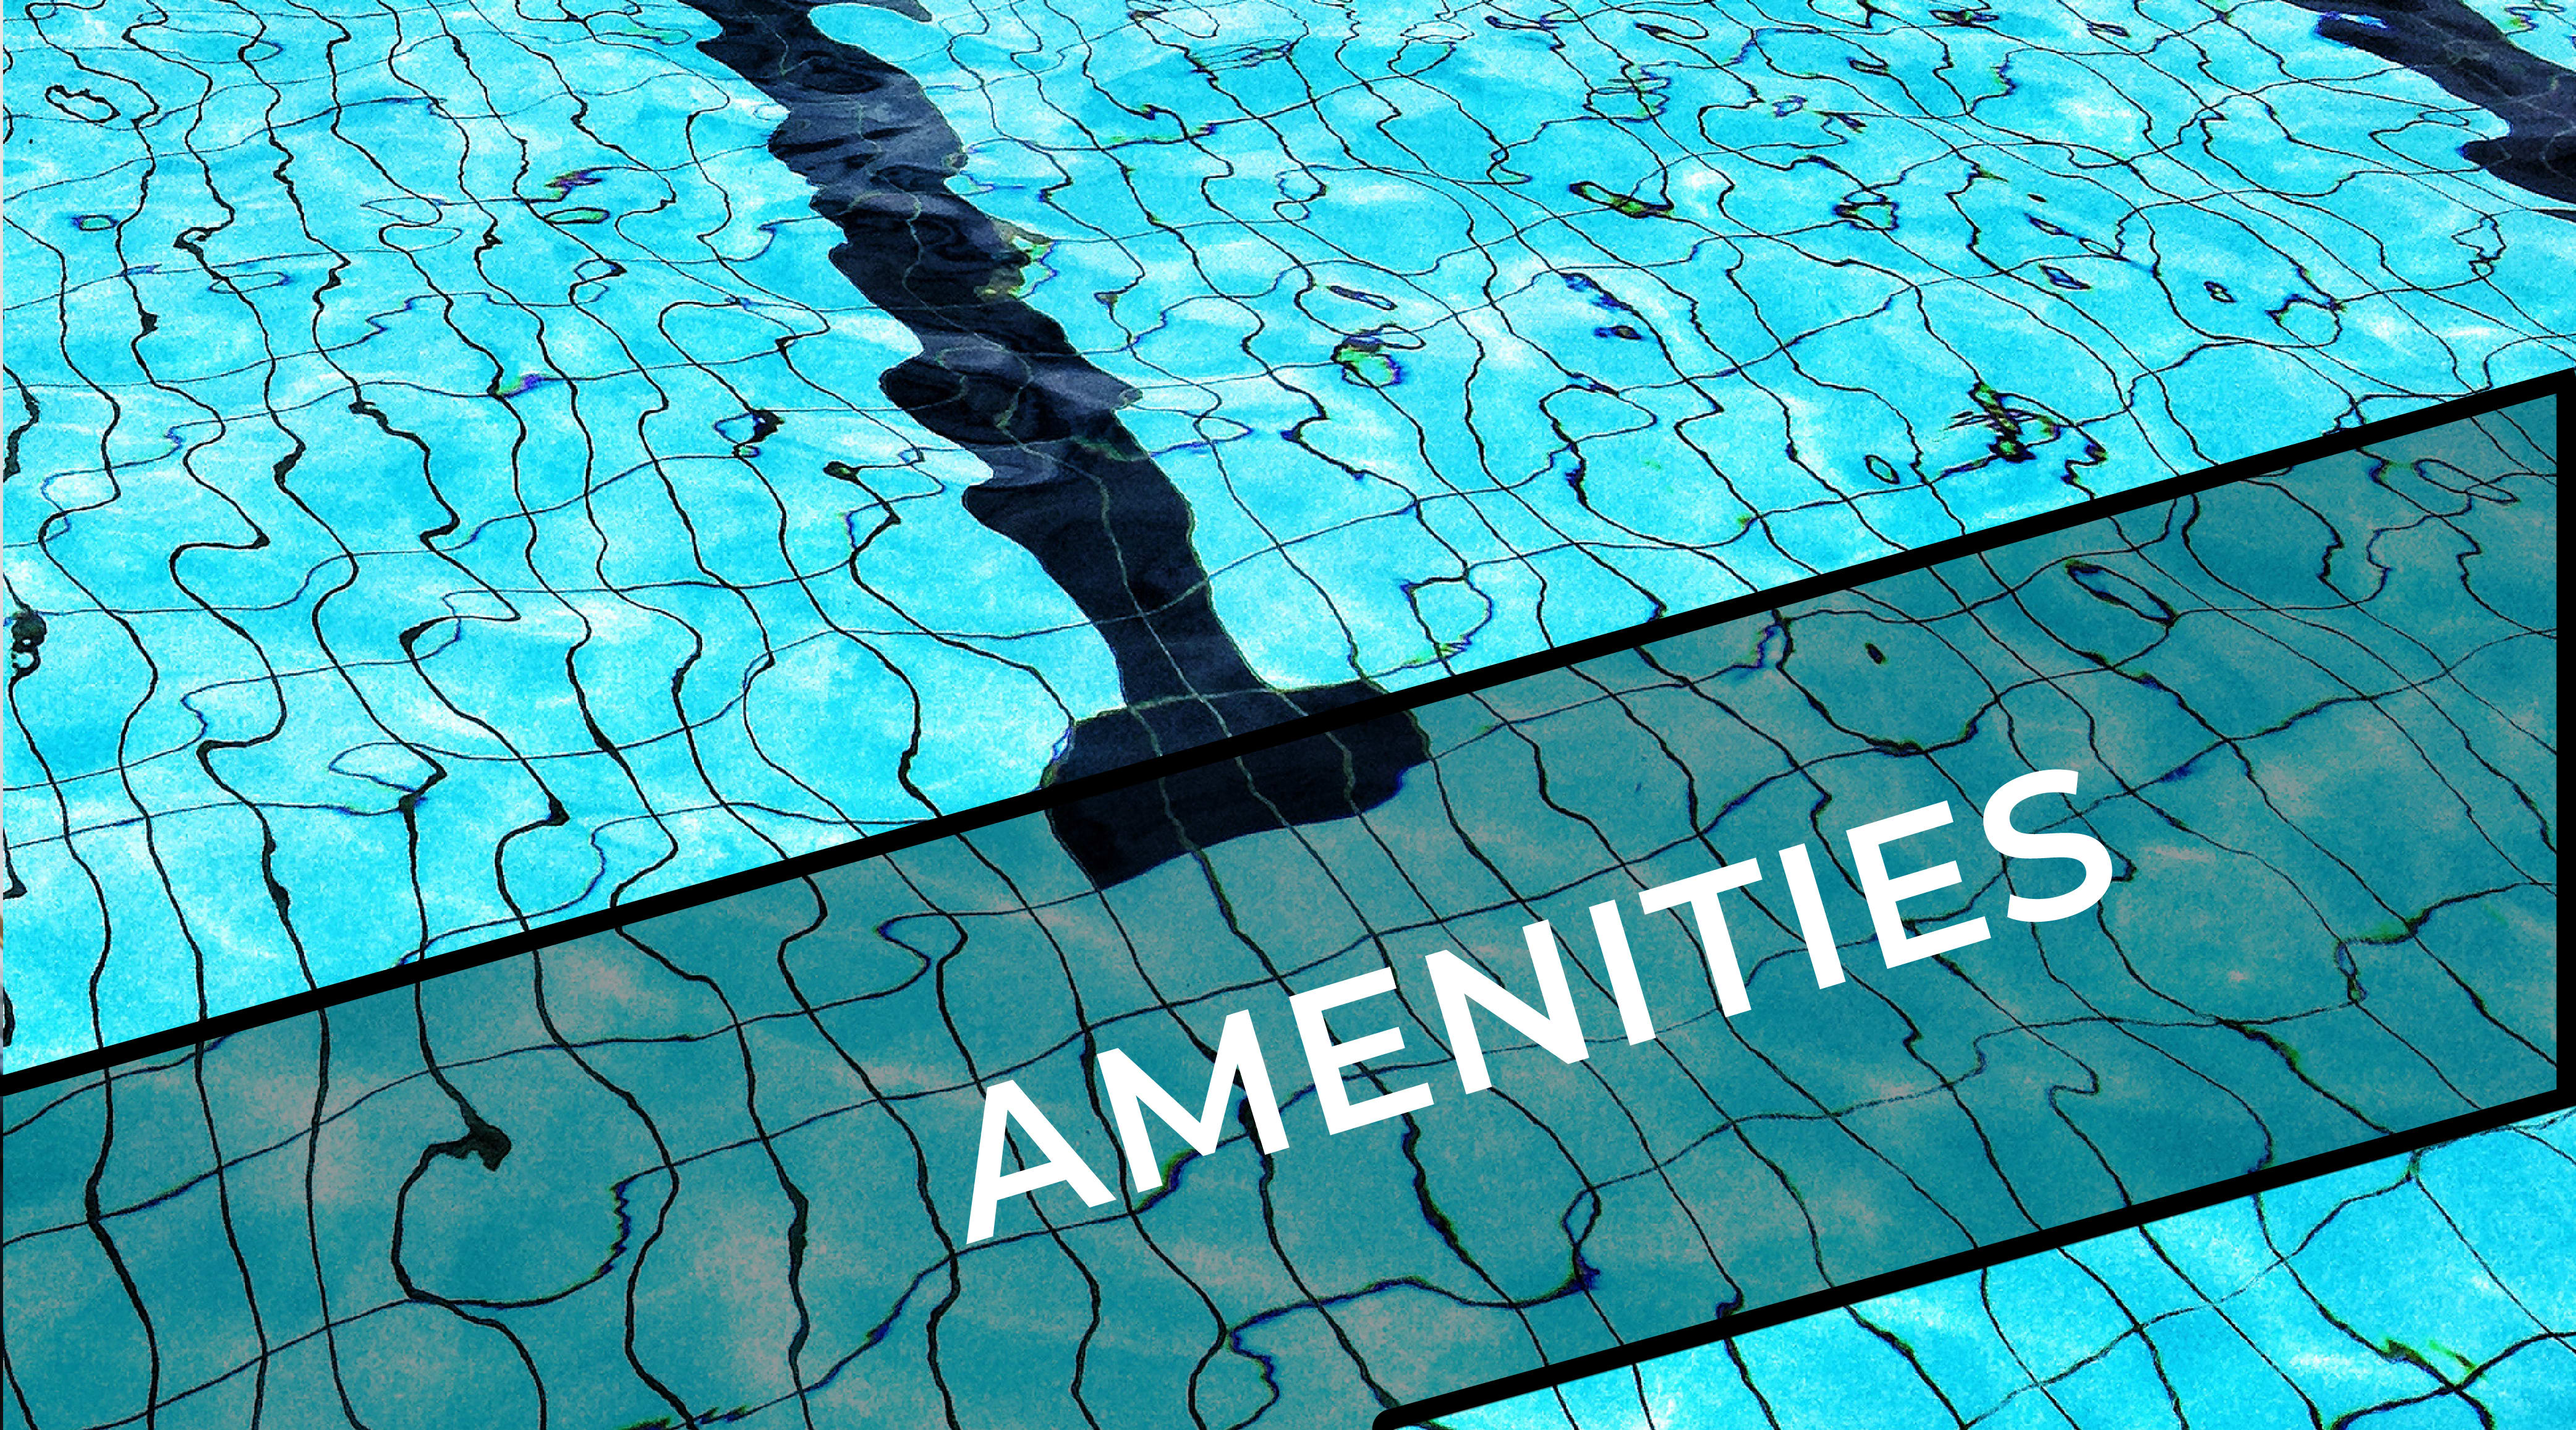 Amenities at Xenia Apartments in Golden Valley, Minnesota